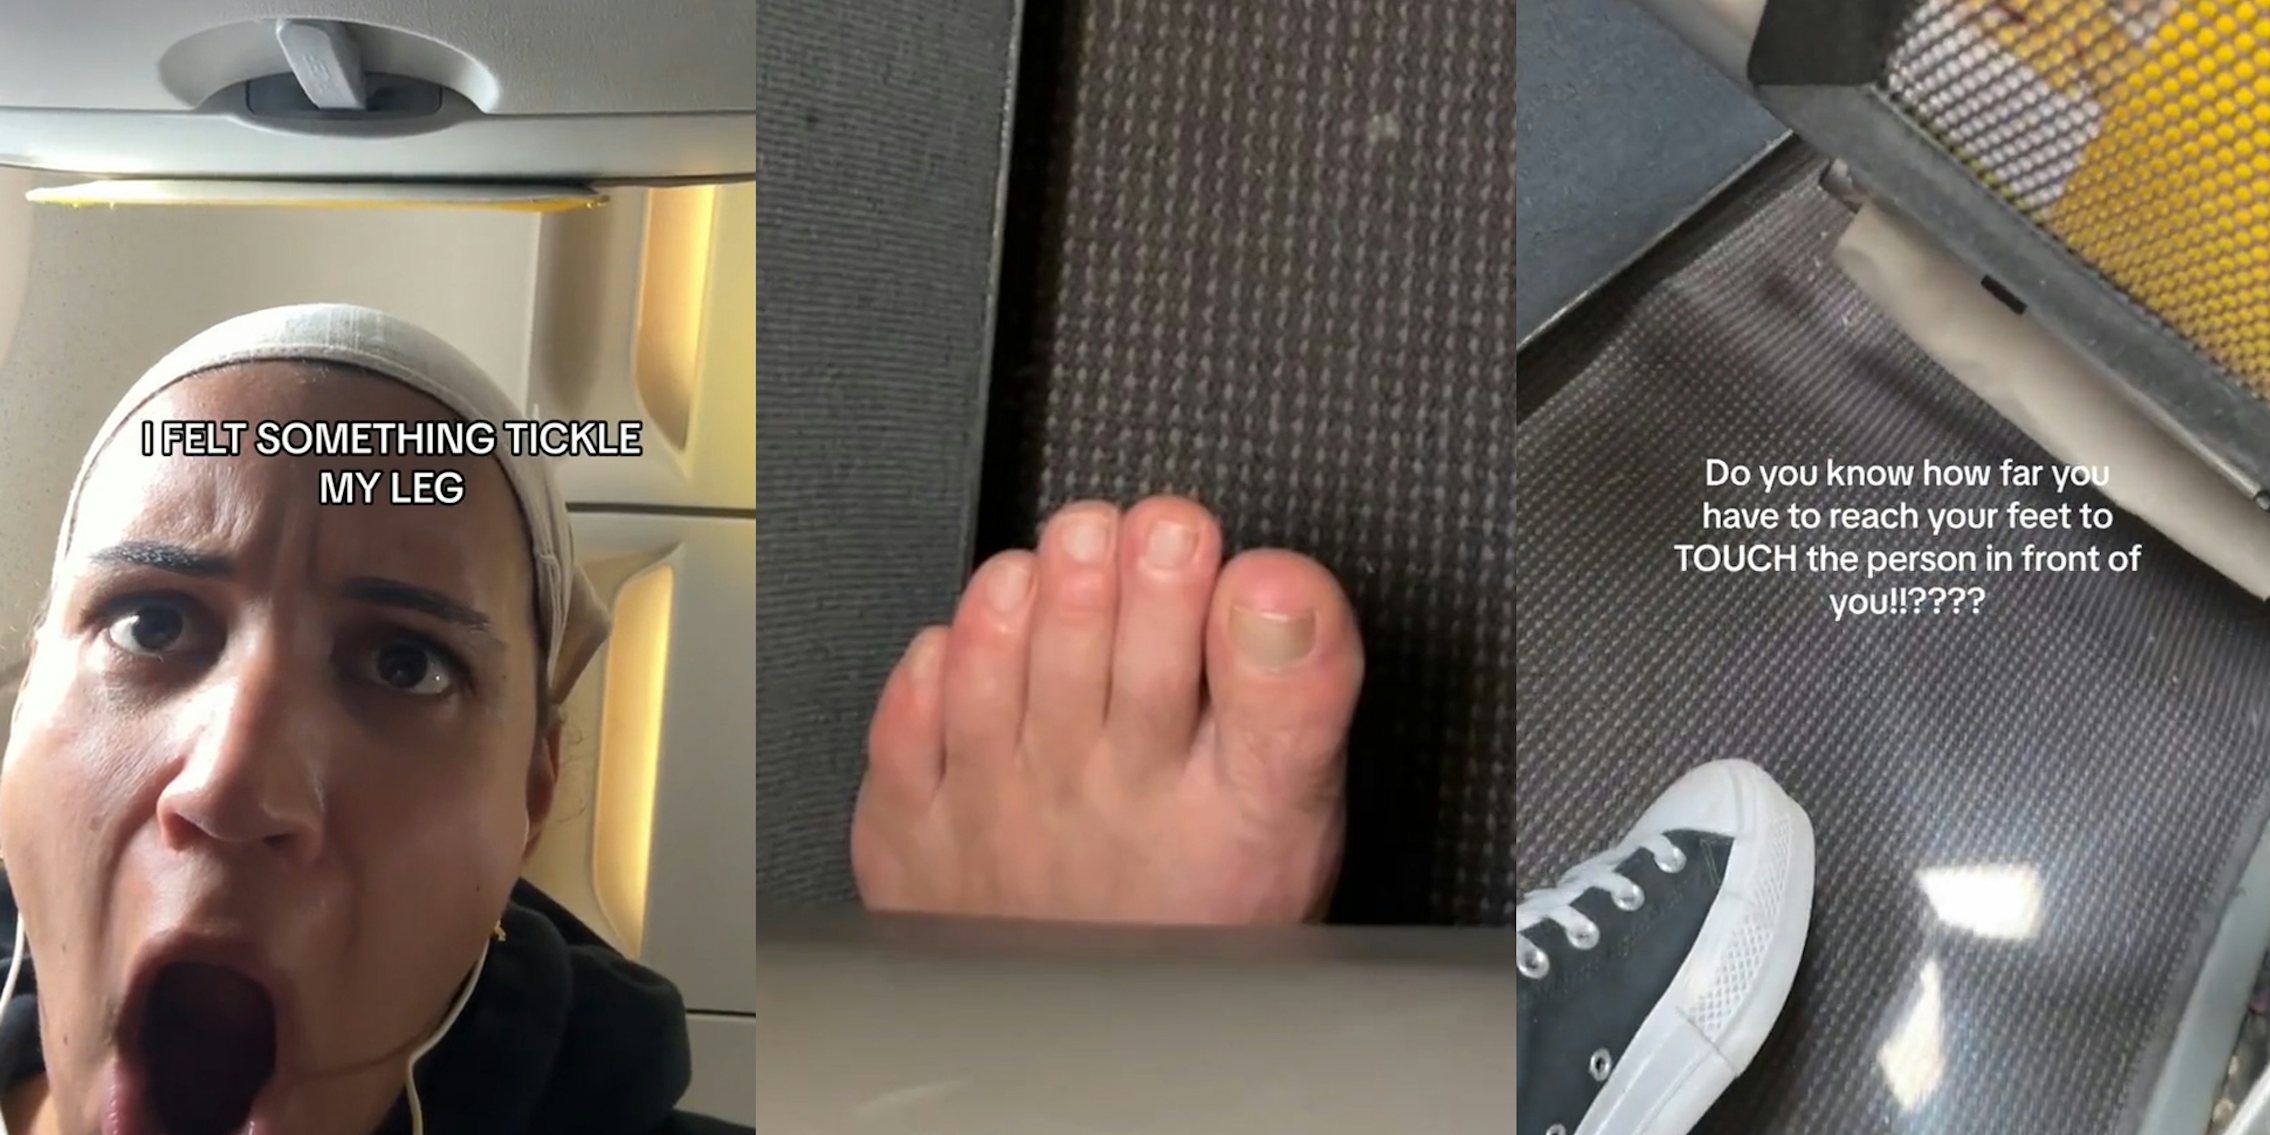 traveler in plane with caption 'I FELT SOMETHING TICKLE MY LEG' (l) barefoot poking out beneath plane seat (c) foot space area of plane seating with caption 'Do you know how far you have to reach your feet to TOUCH the person in front of you!!????' (r)